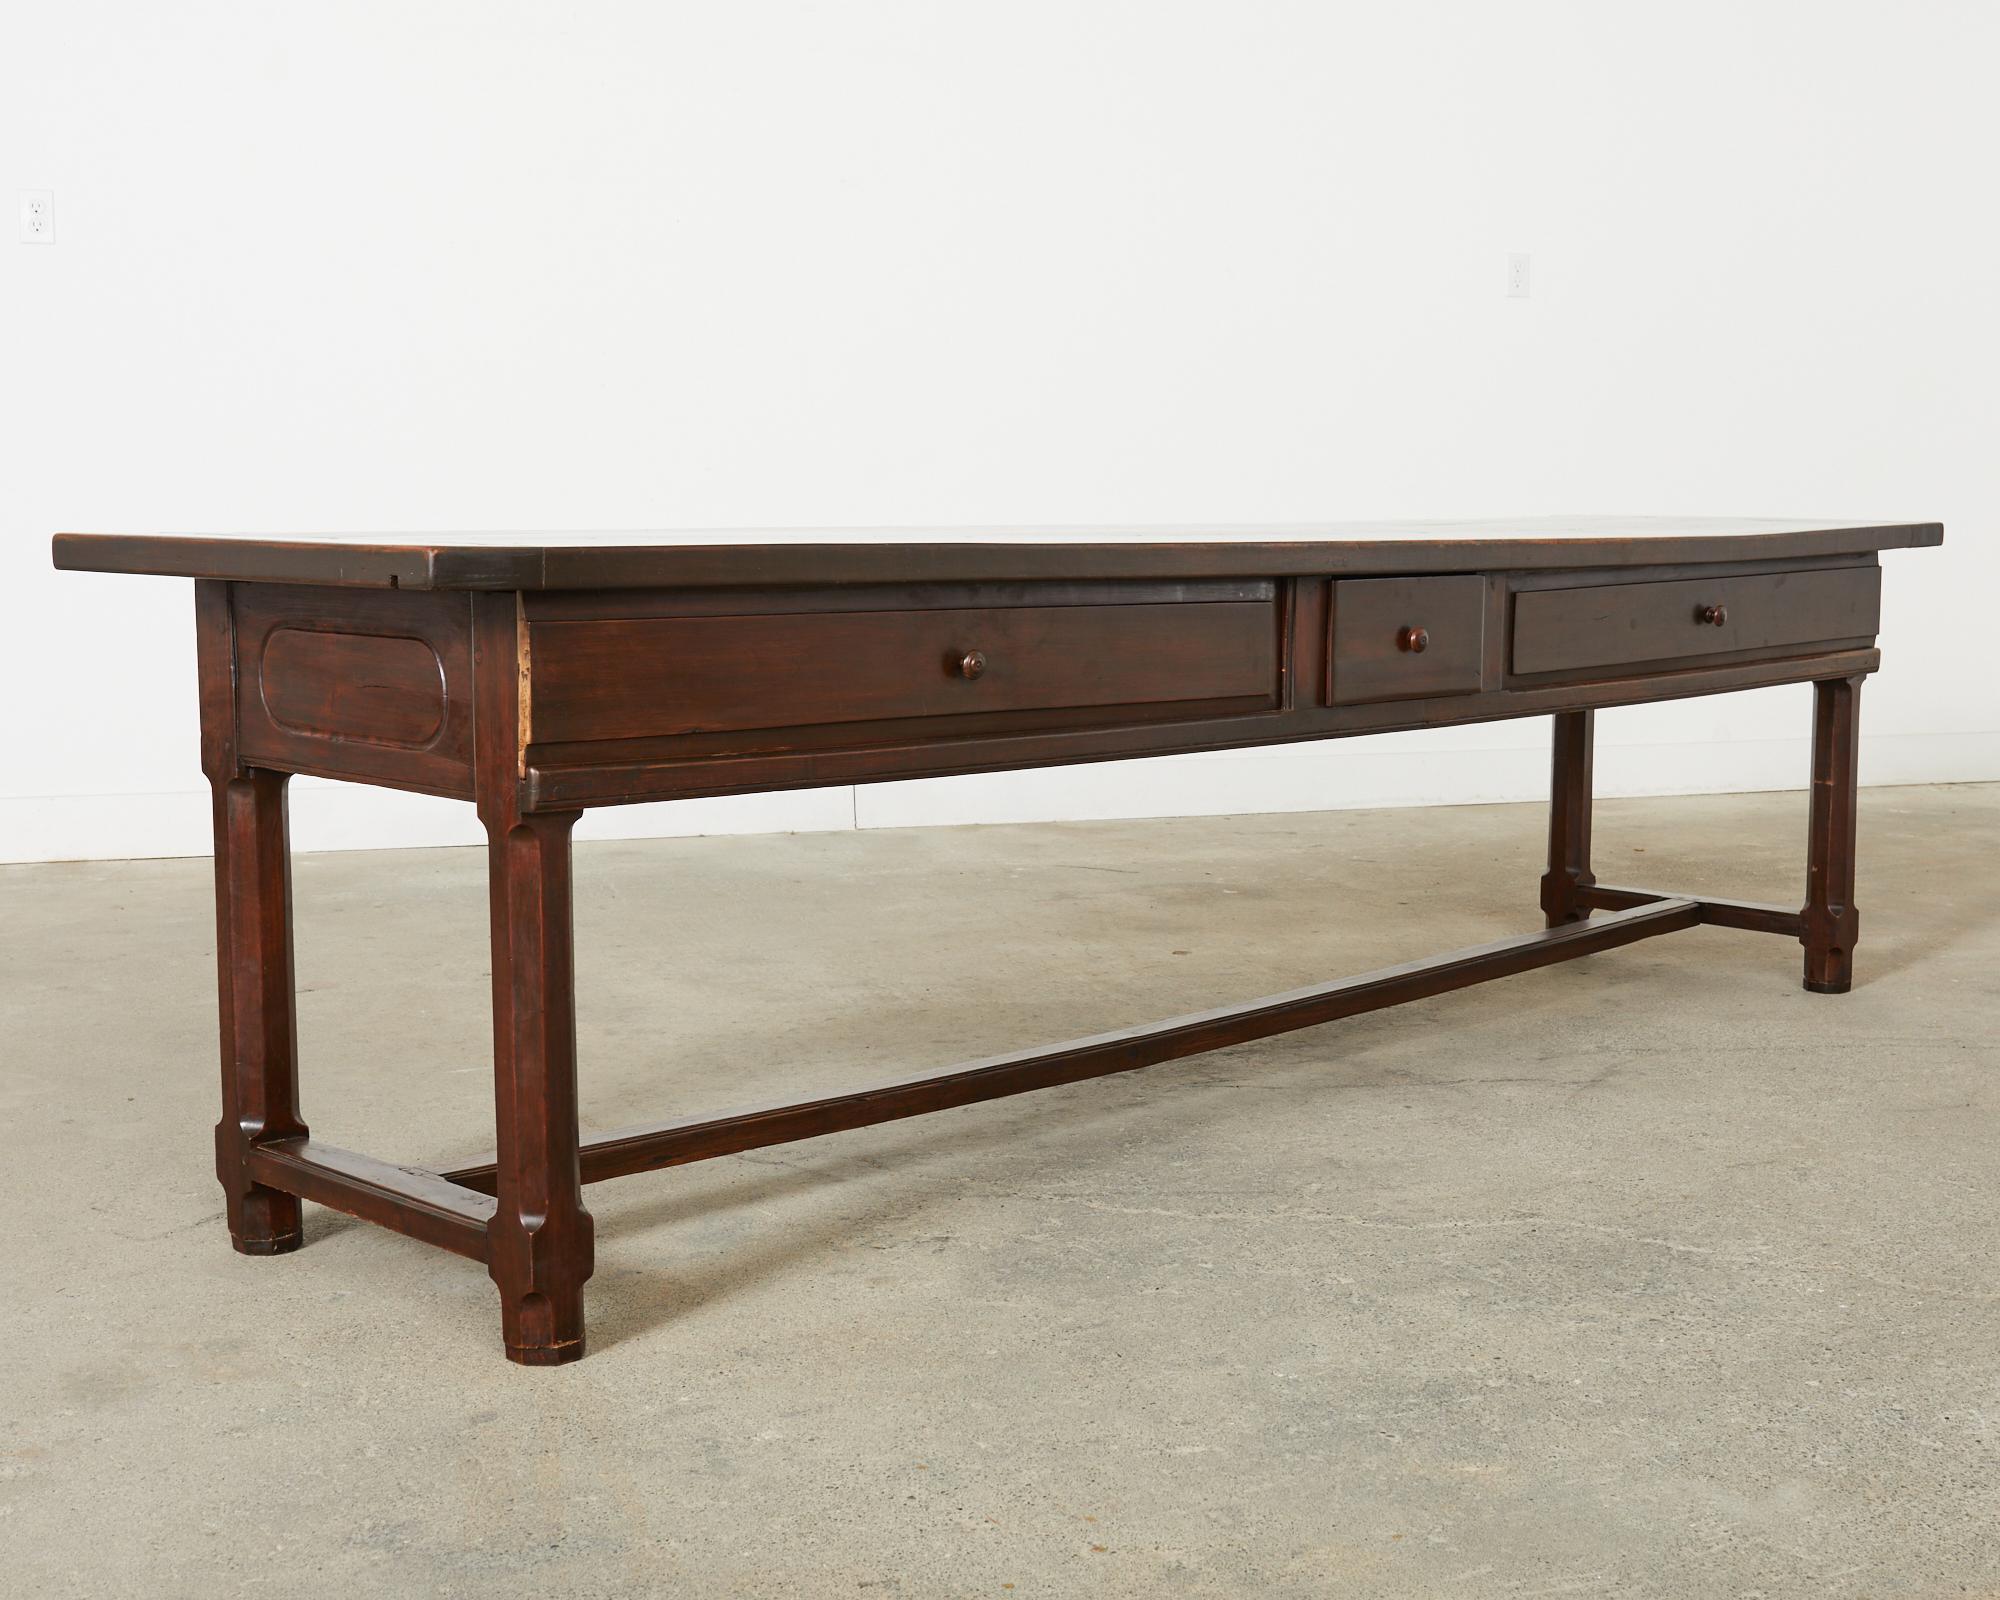 Country French Provincial Style Chestnut Farmhouse Trestle Table For Sale 4